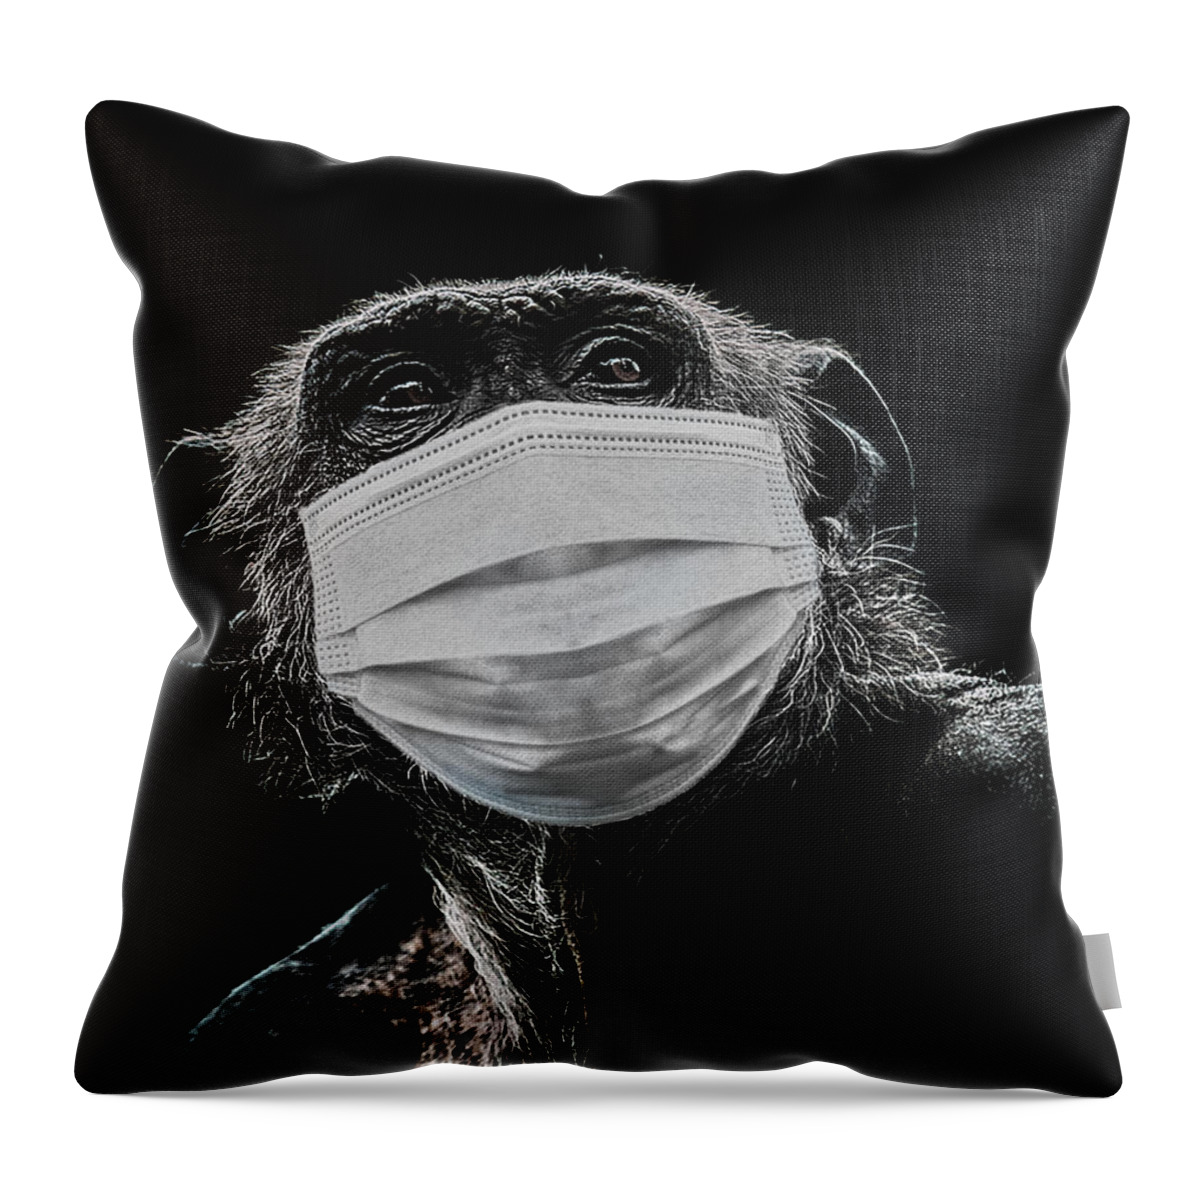 Chimpanzee Throw Pillow featuring the photograph Evolution by Paul Neville